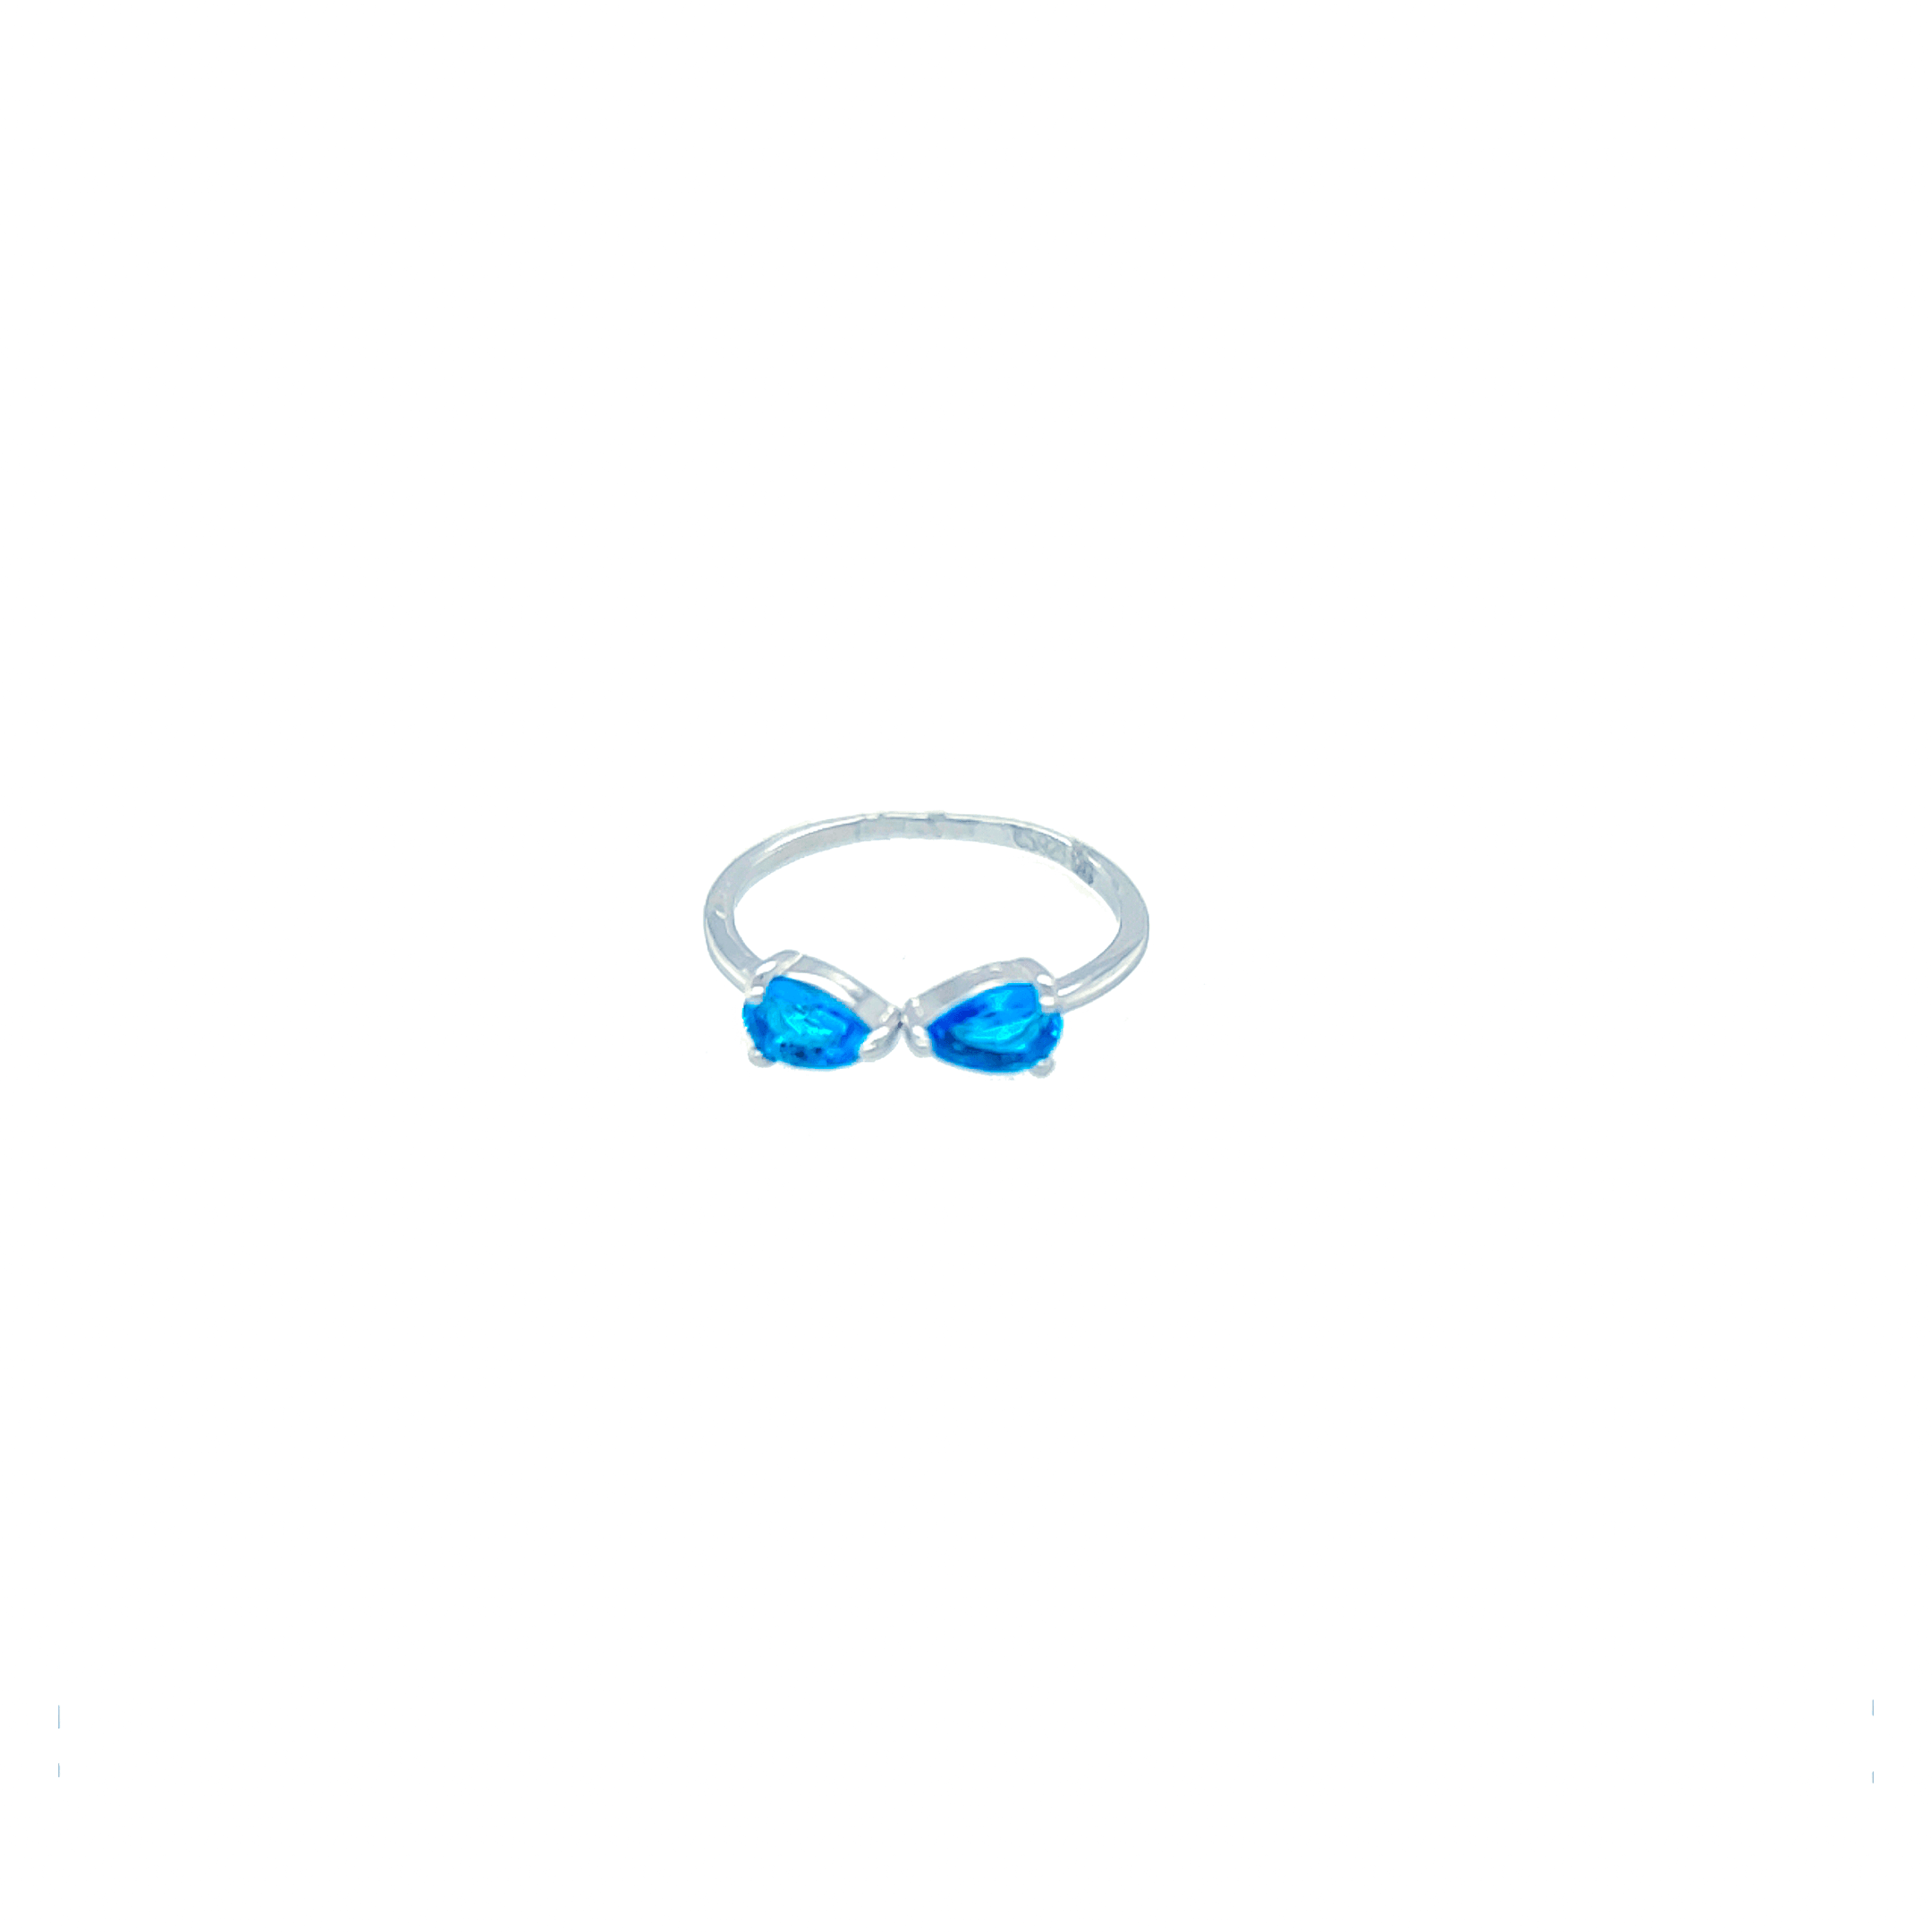 Asfour-Crystal-Sterling-Silver-925-Aquamarine-Oval-Cloves-Ring-Silver-Free-Size